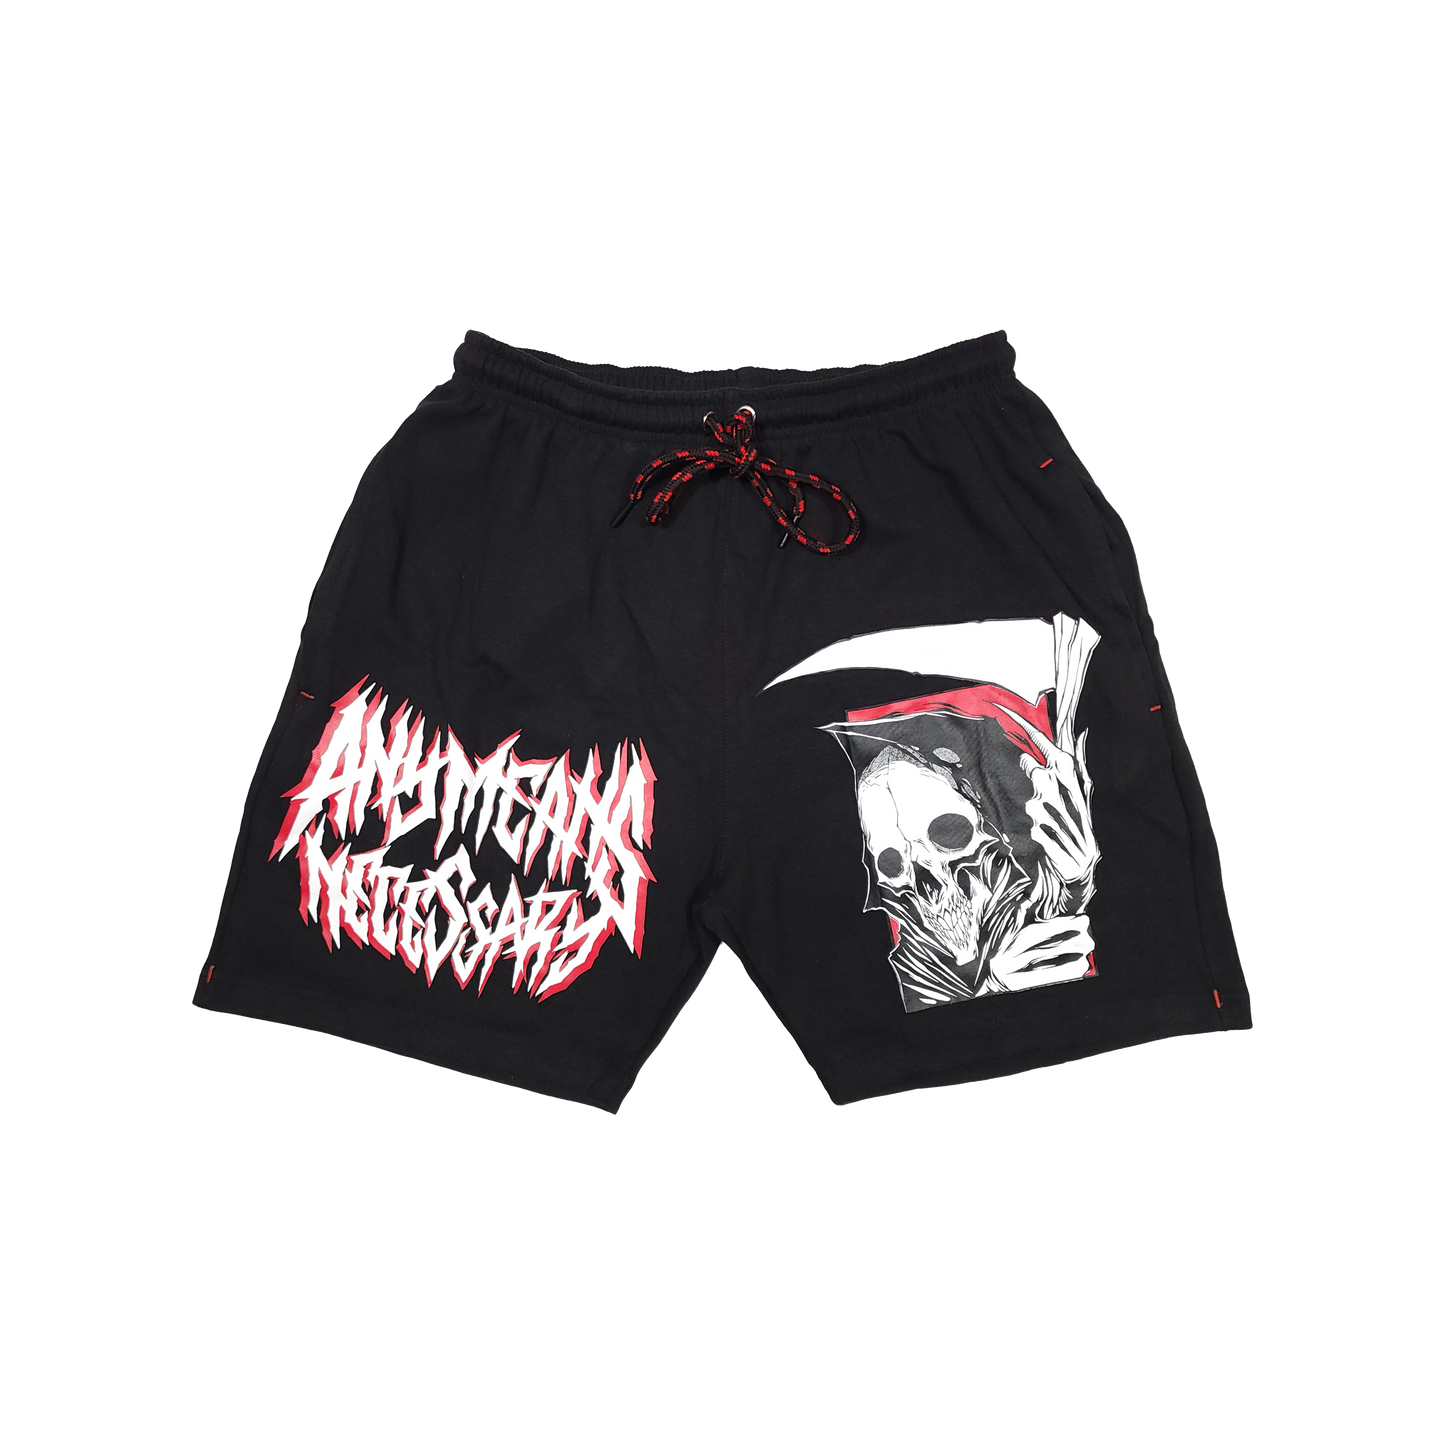 any means necessary shawn coss reaper shorts black